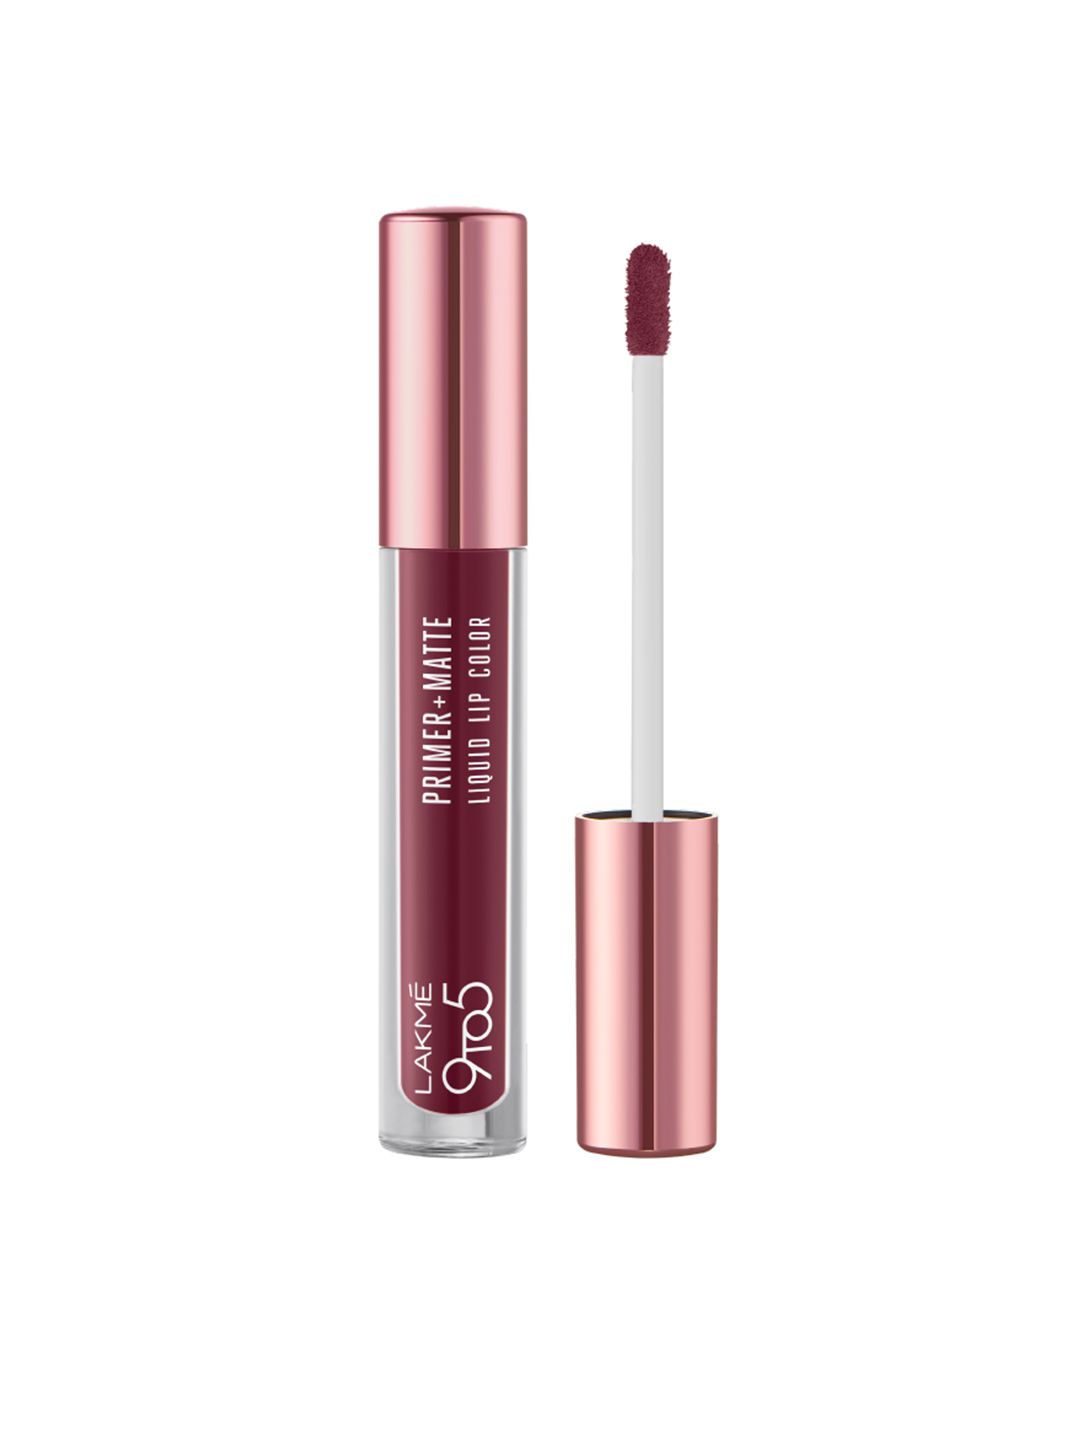 Lakme 9 to 5 Primer+Matte Liquid Lip Color with Vit-E and Argan Oil 4.2ml-Edgy Mauve MM1 Price in India